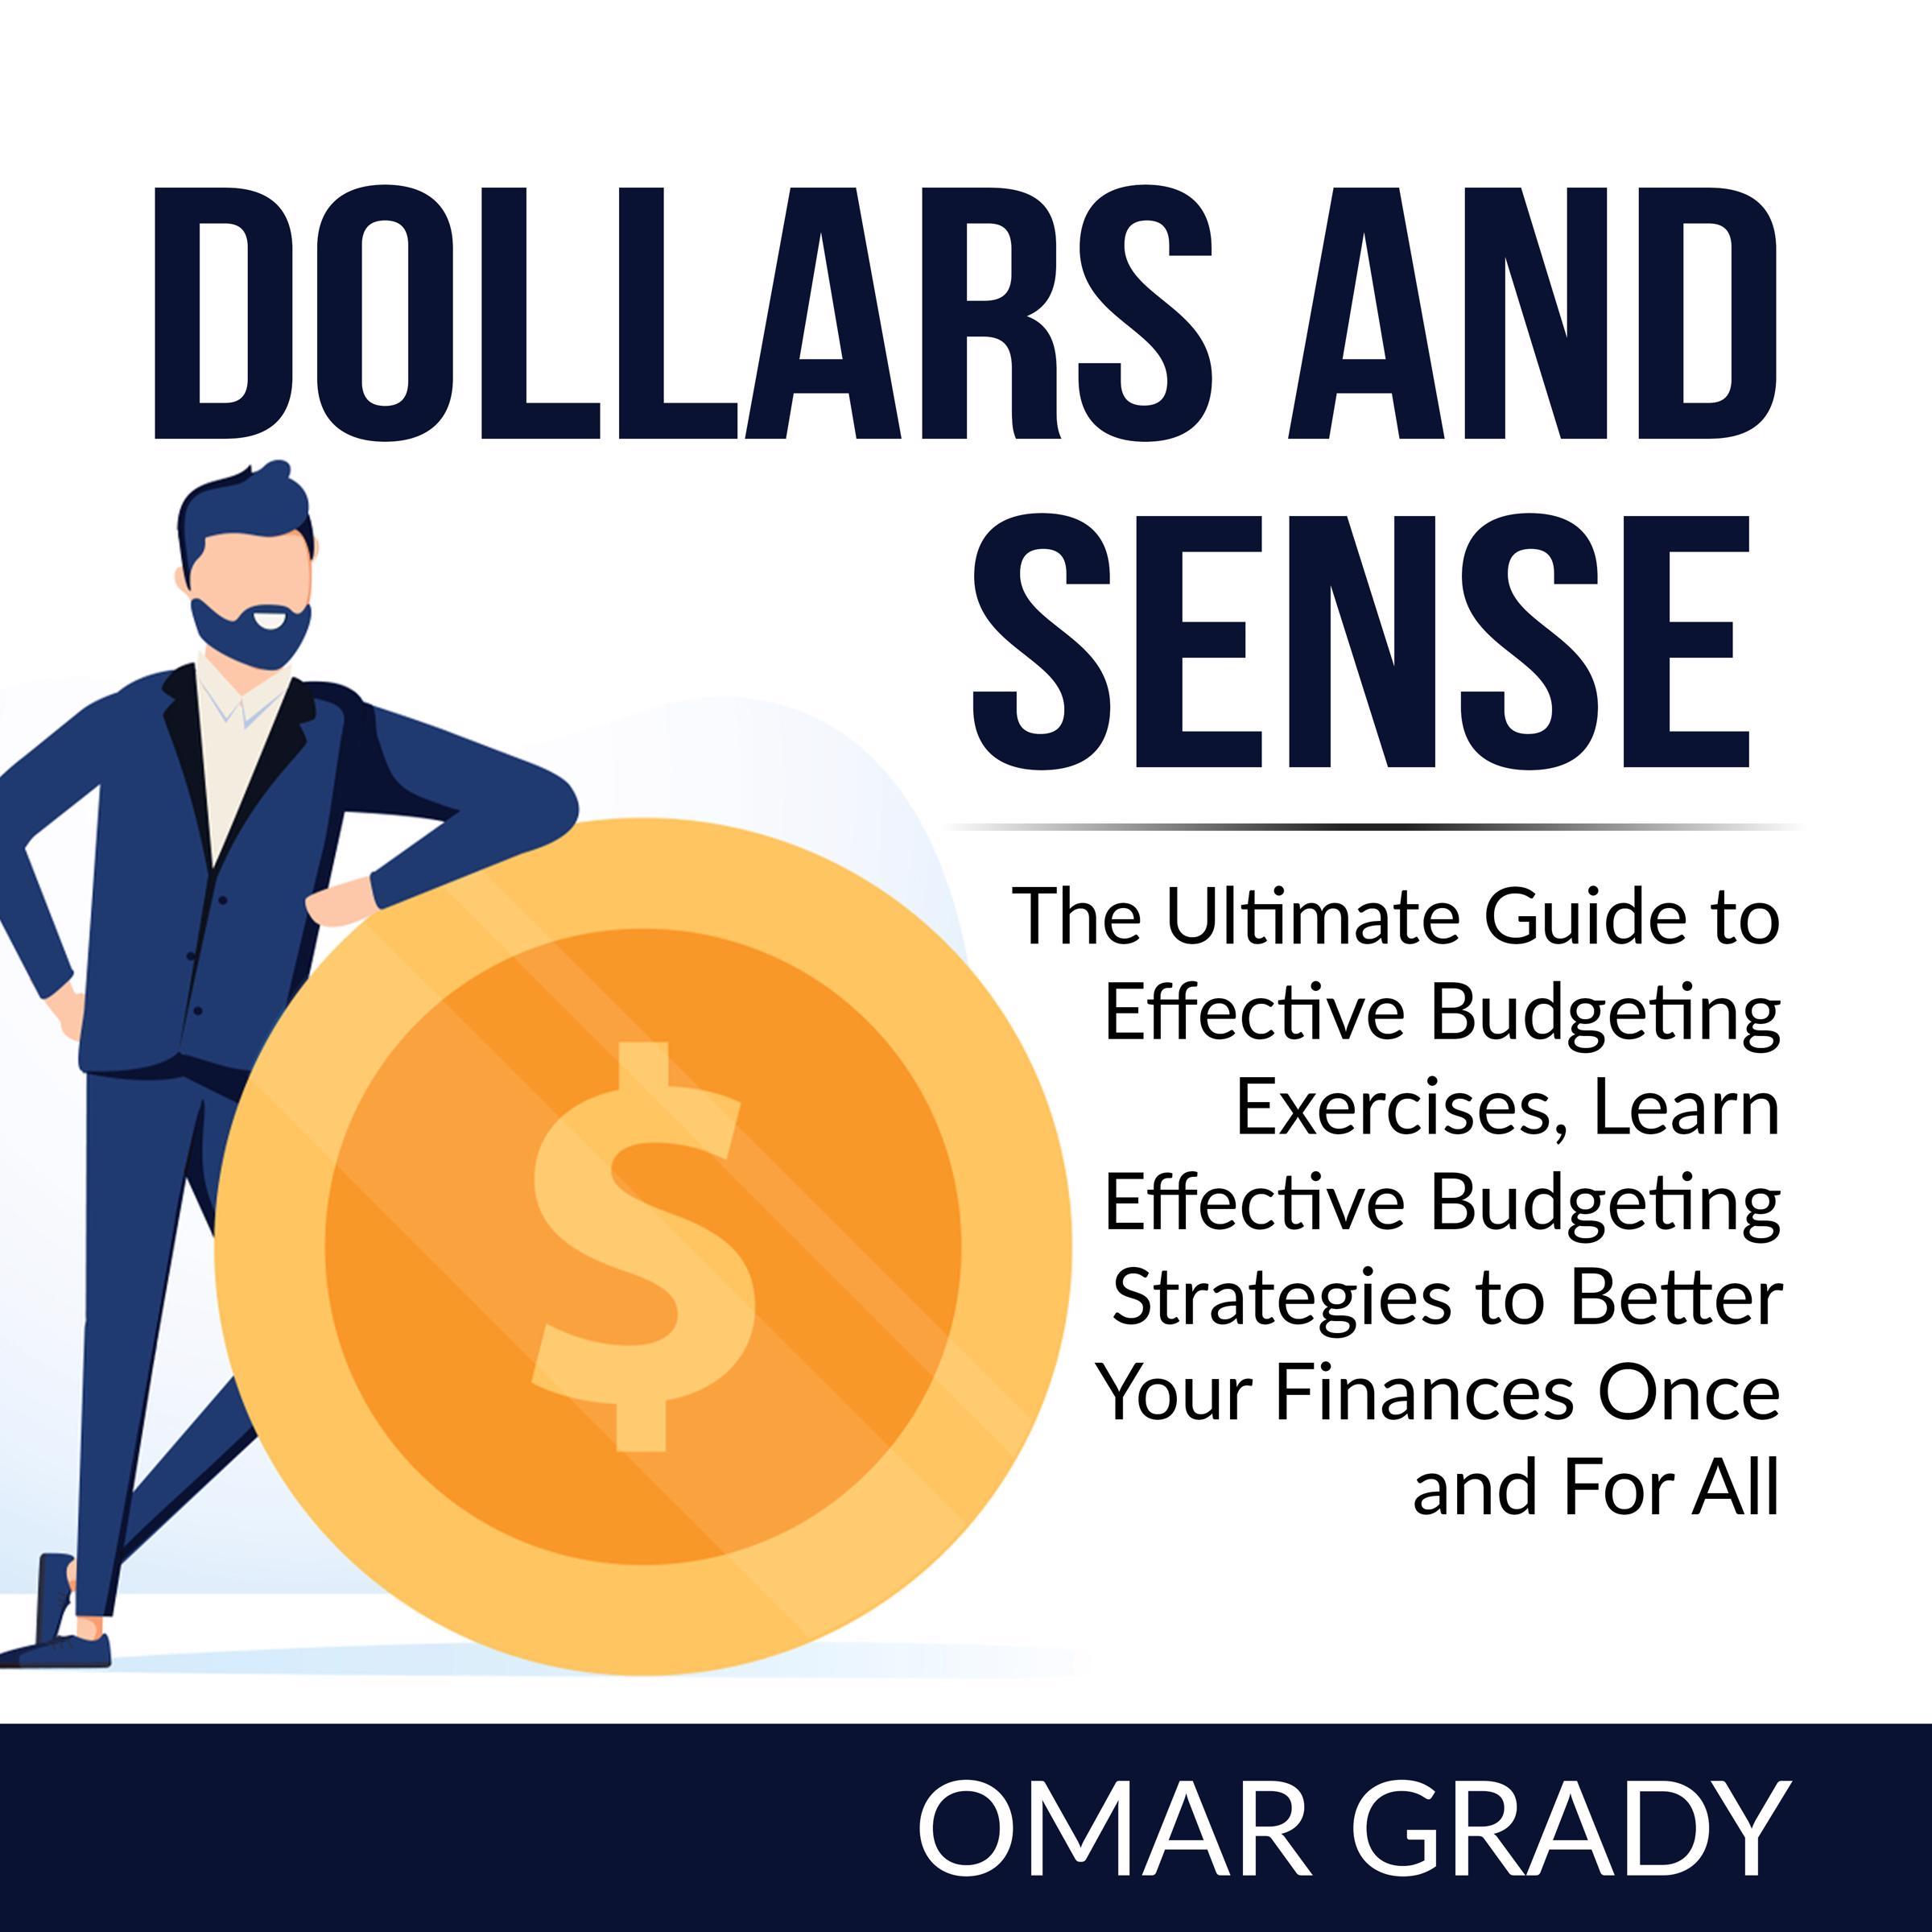 Dollars and Sense: The Ultimate Guide to Effective Budgeting Exercises, Learn Effective Budgeting Strategies to Better Your Finances Once and For All